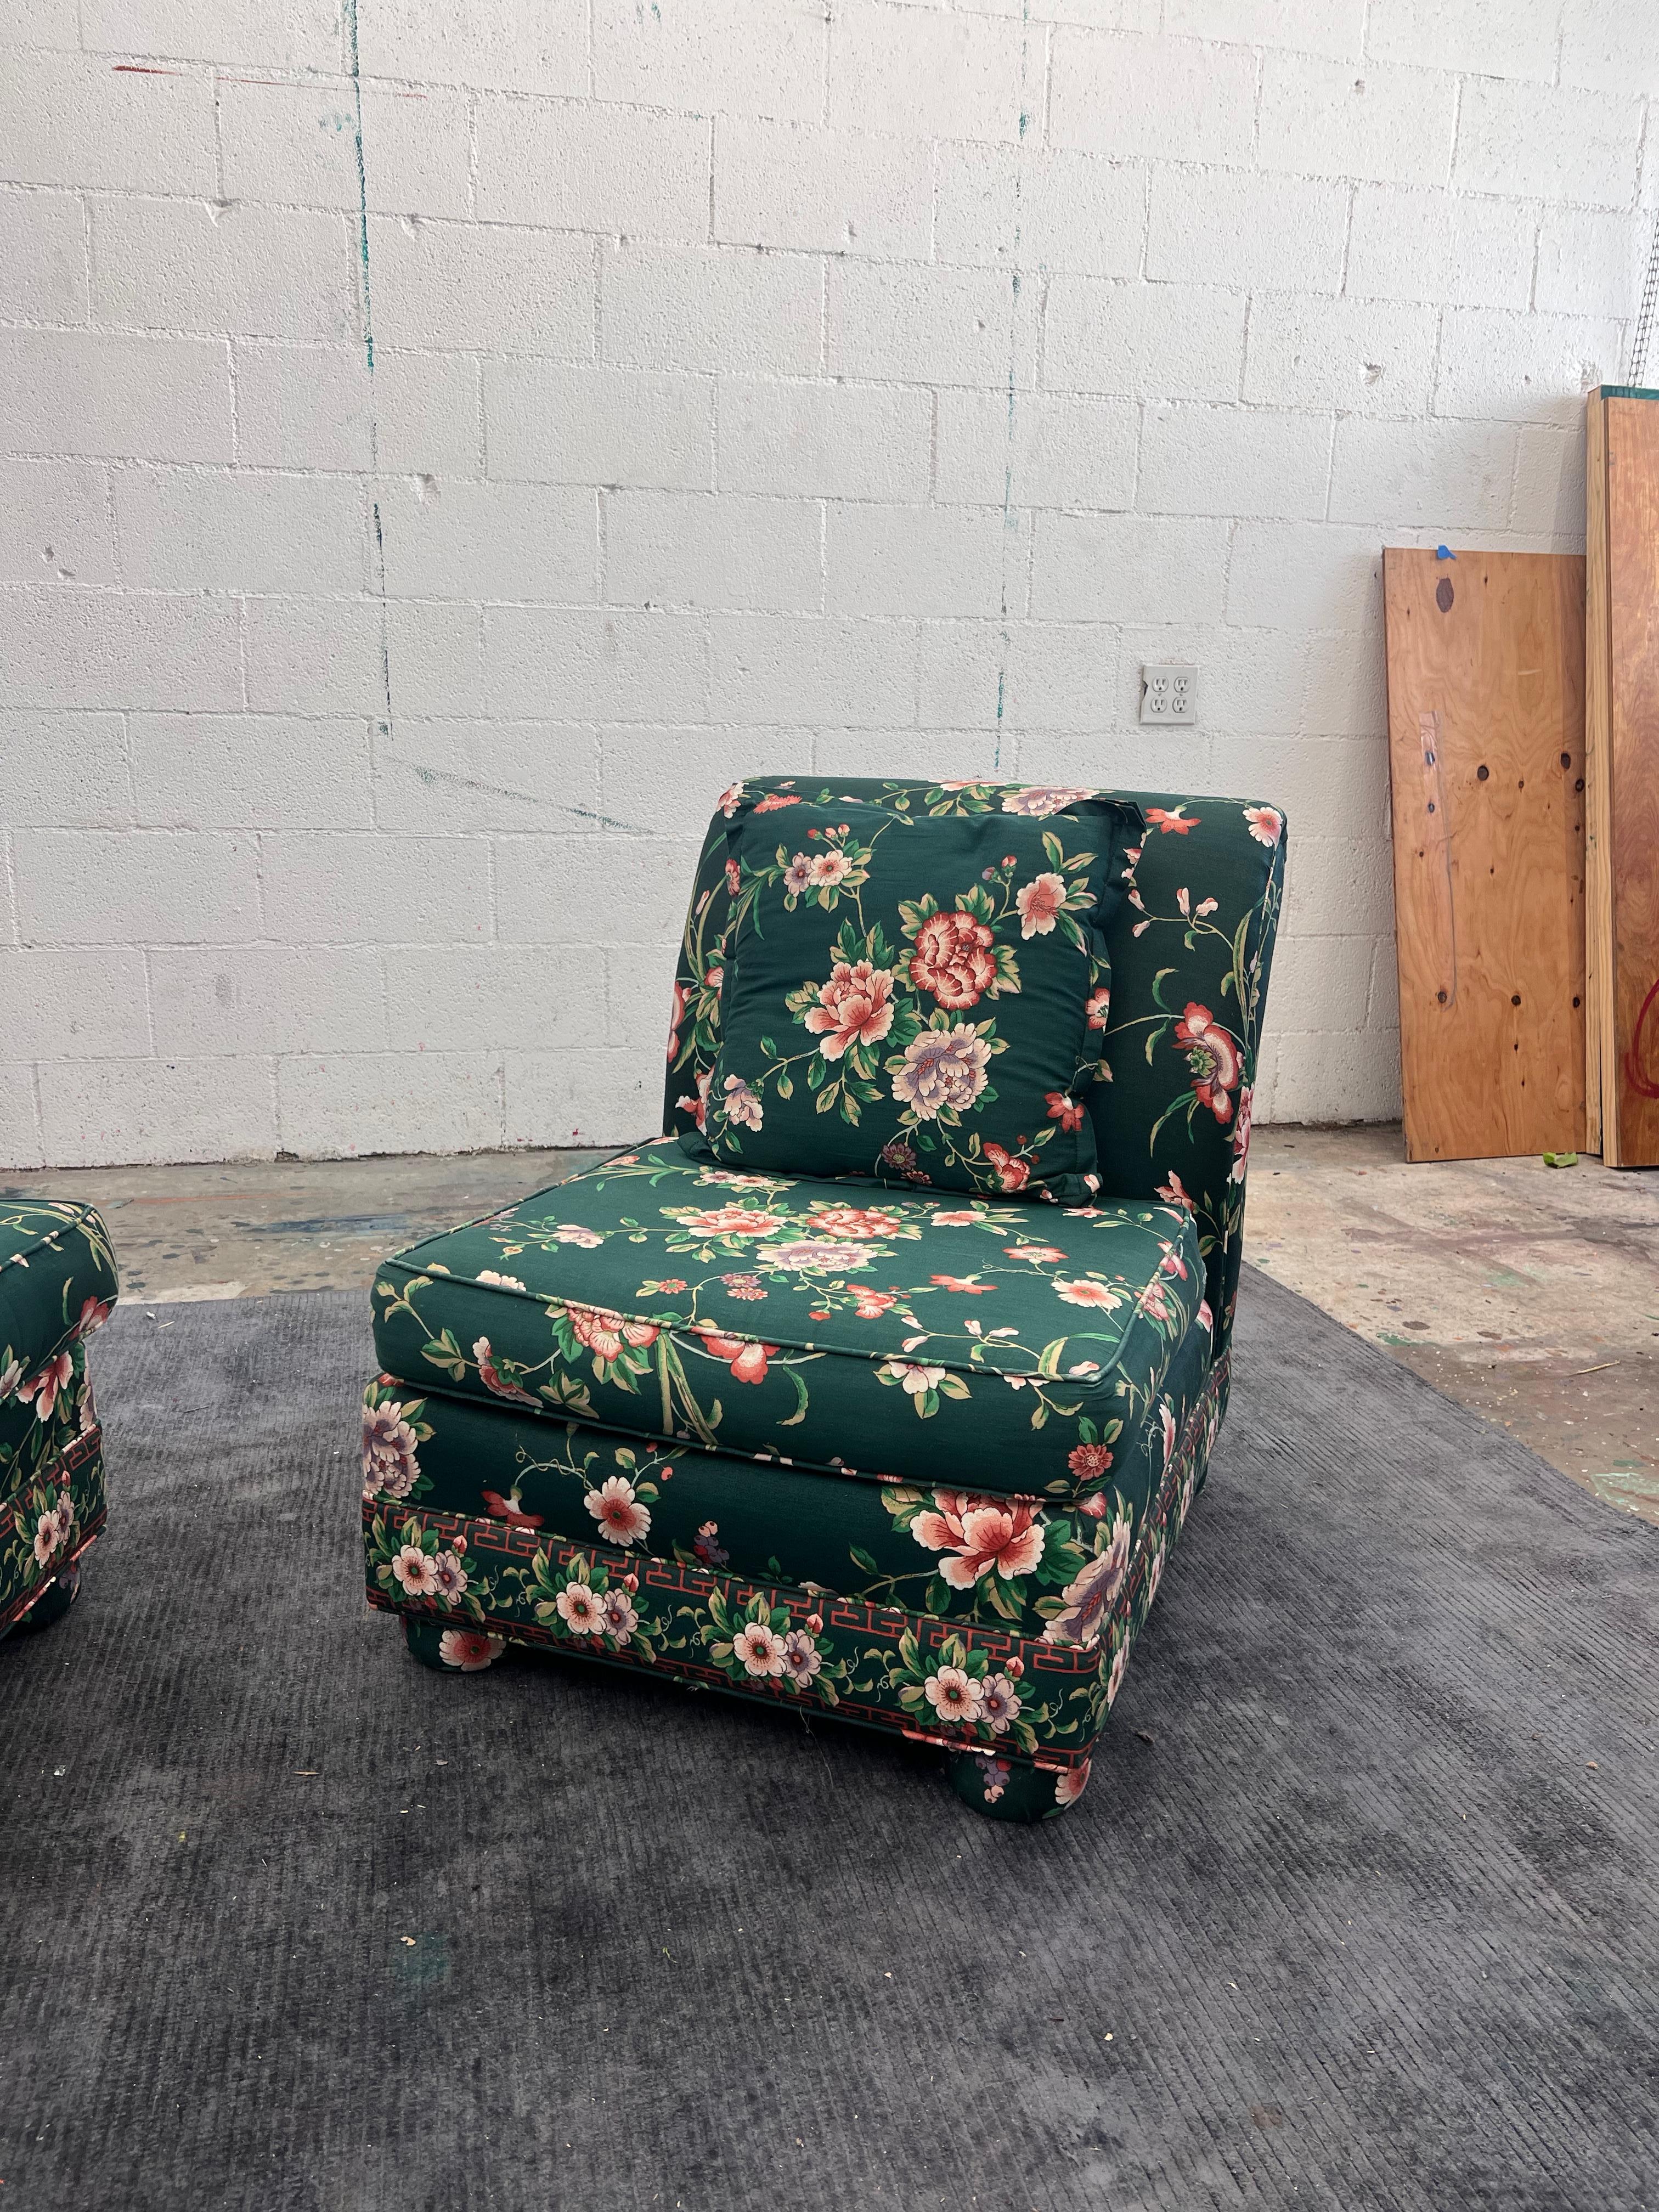 Pair of Vintage 1980s hunter green floral slipper chairs In Good Condition For Sale In Los Angeles, CA